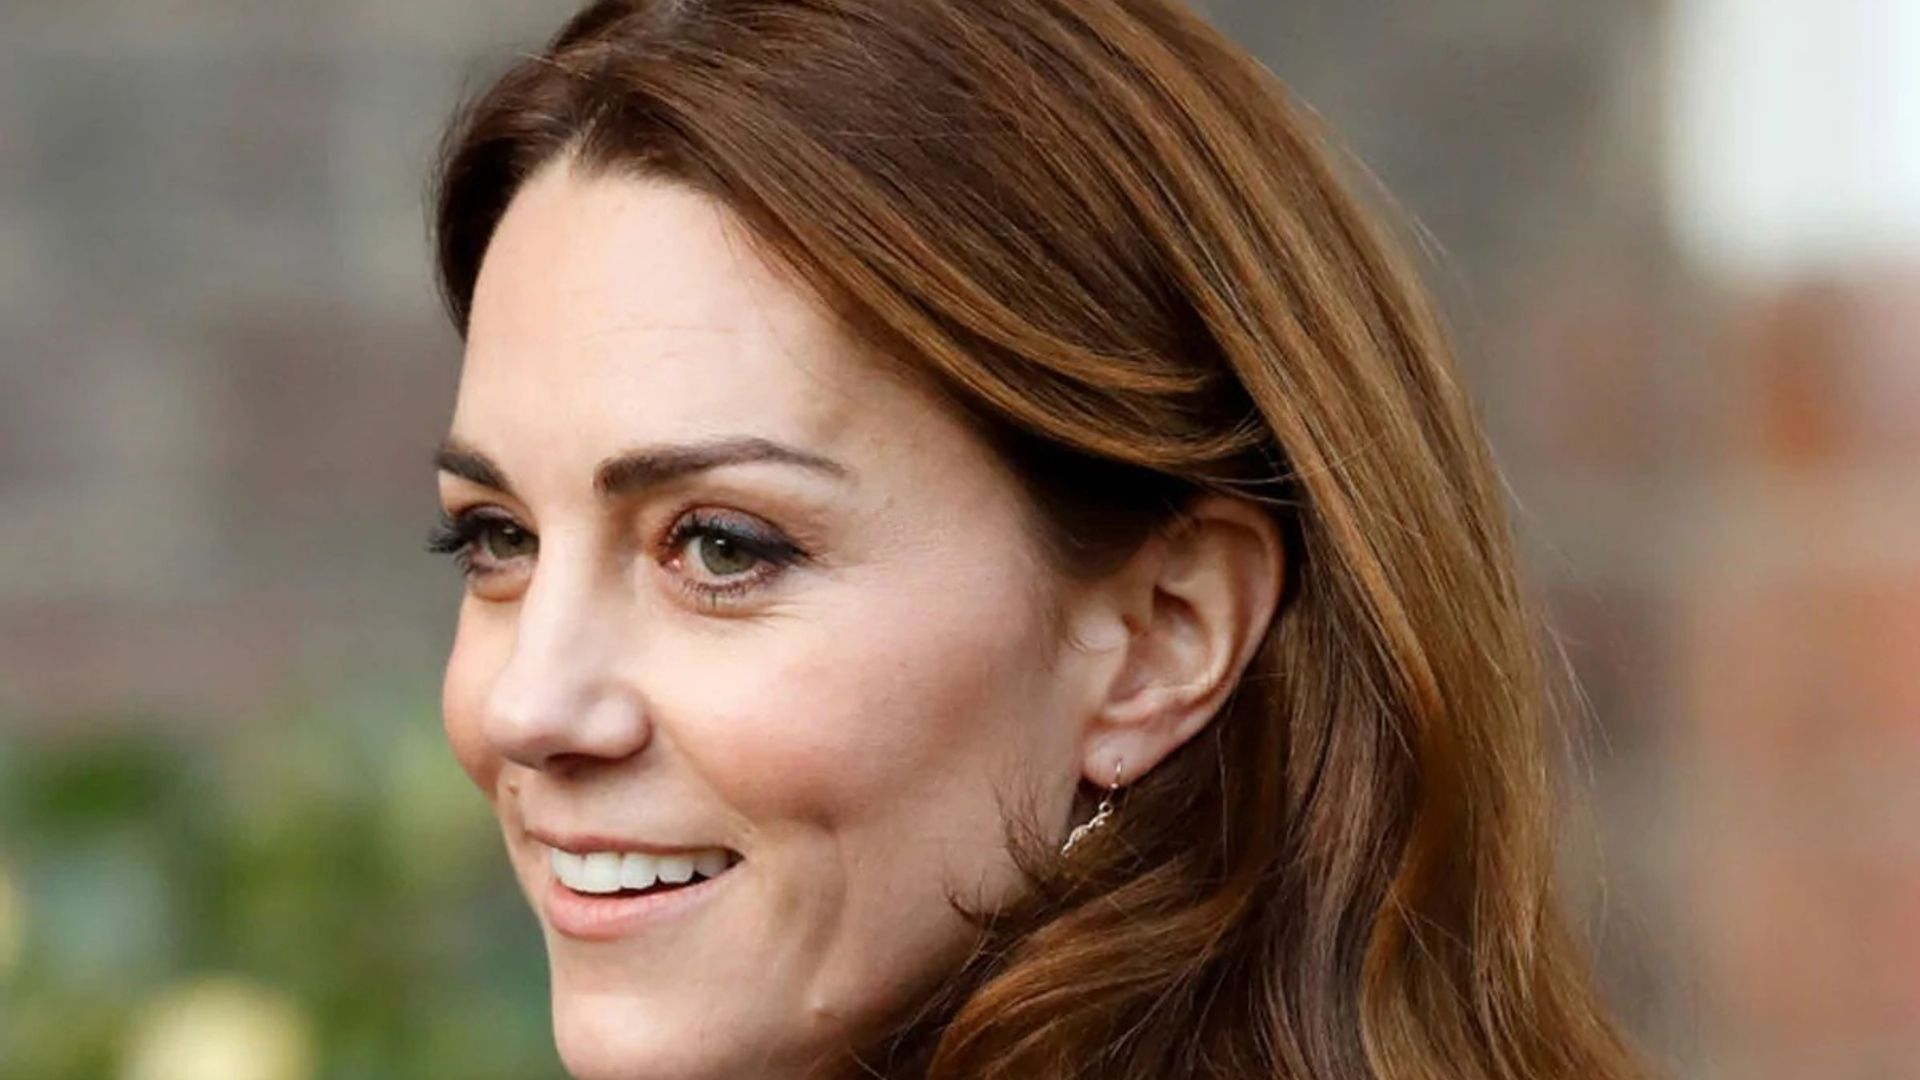 Princess Kate surprised us all when she broke style tradition at this important royal event